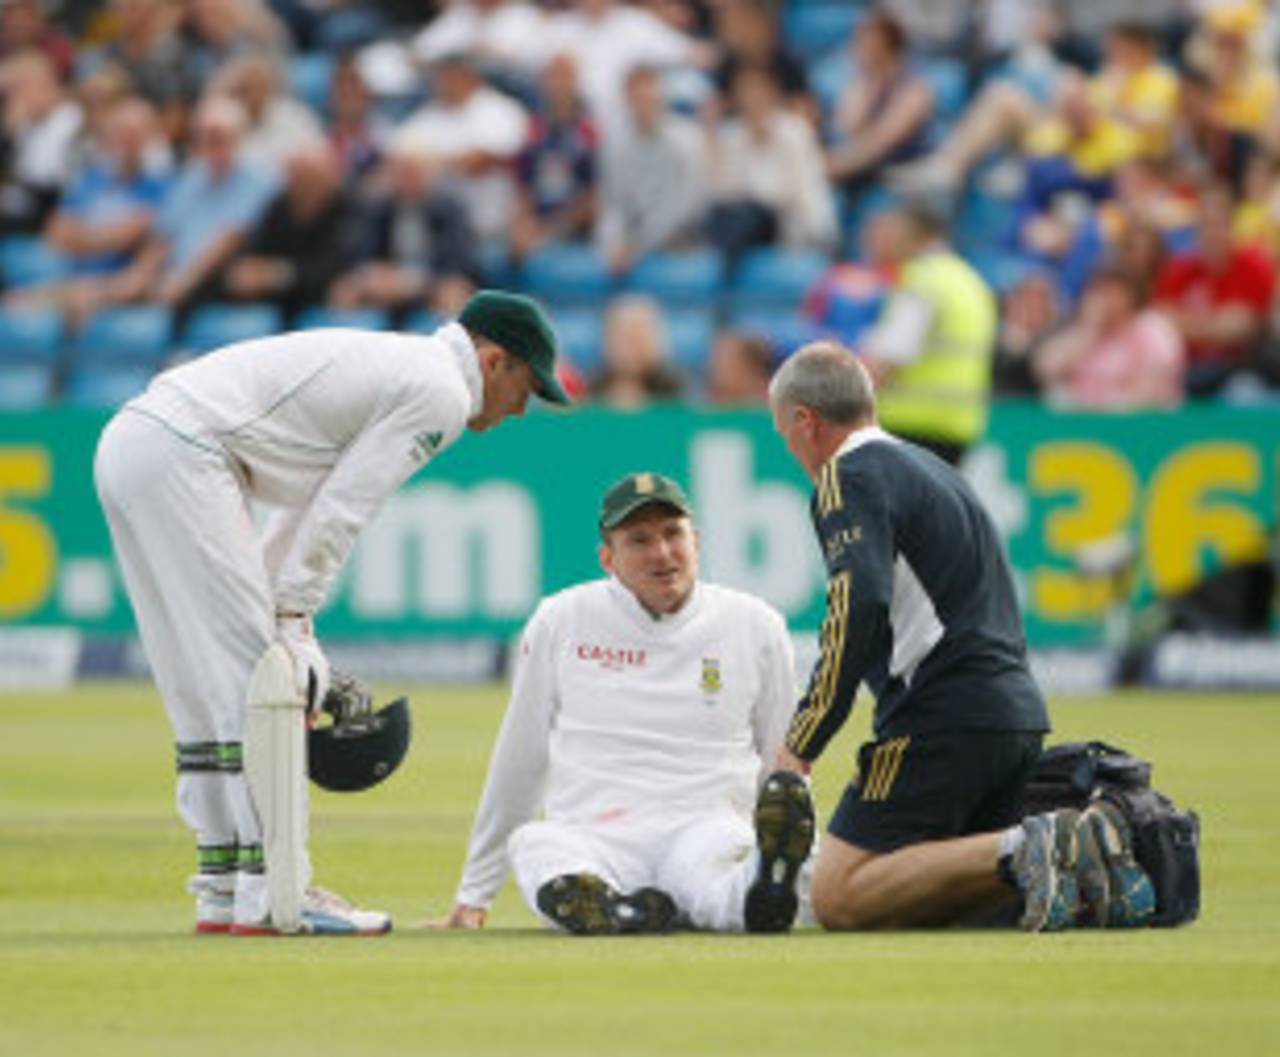 Graeme Smith slid awkwardly on the outfield towards the end of the third day at Headingley&nbsp;&nbsp;&bull;&nbsp;&nbsp;Getty Images